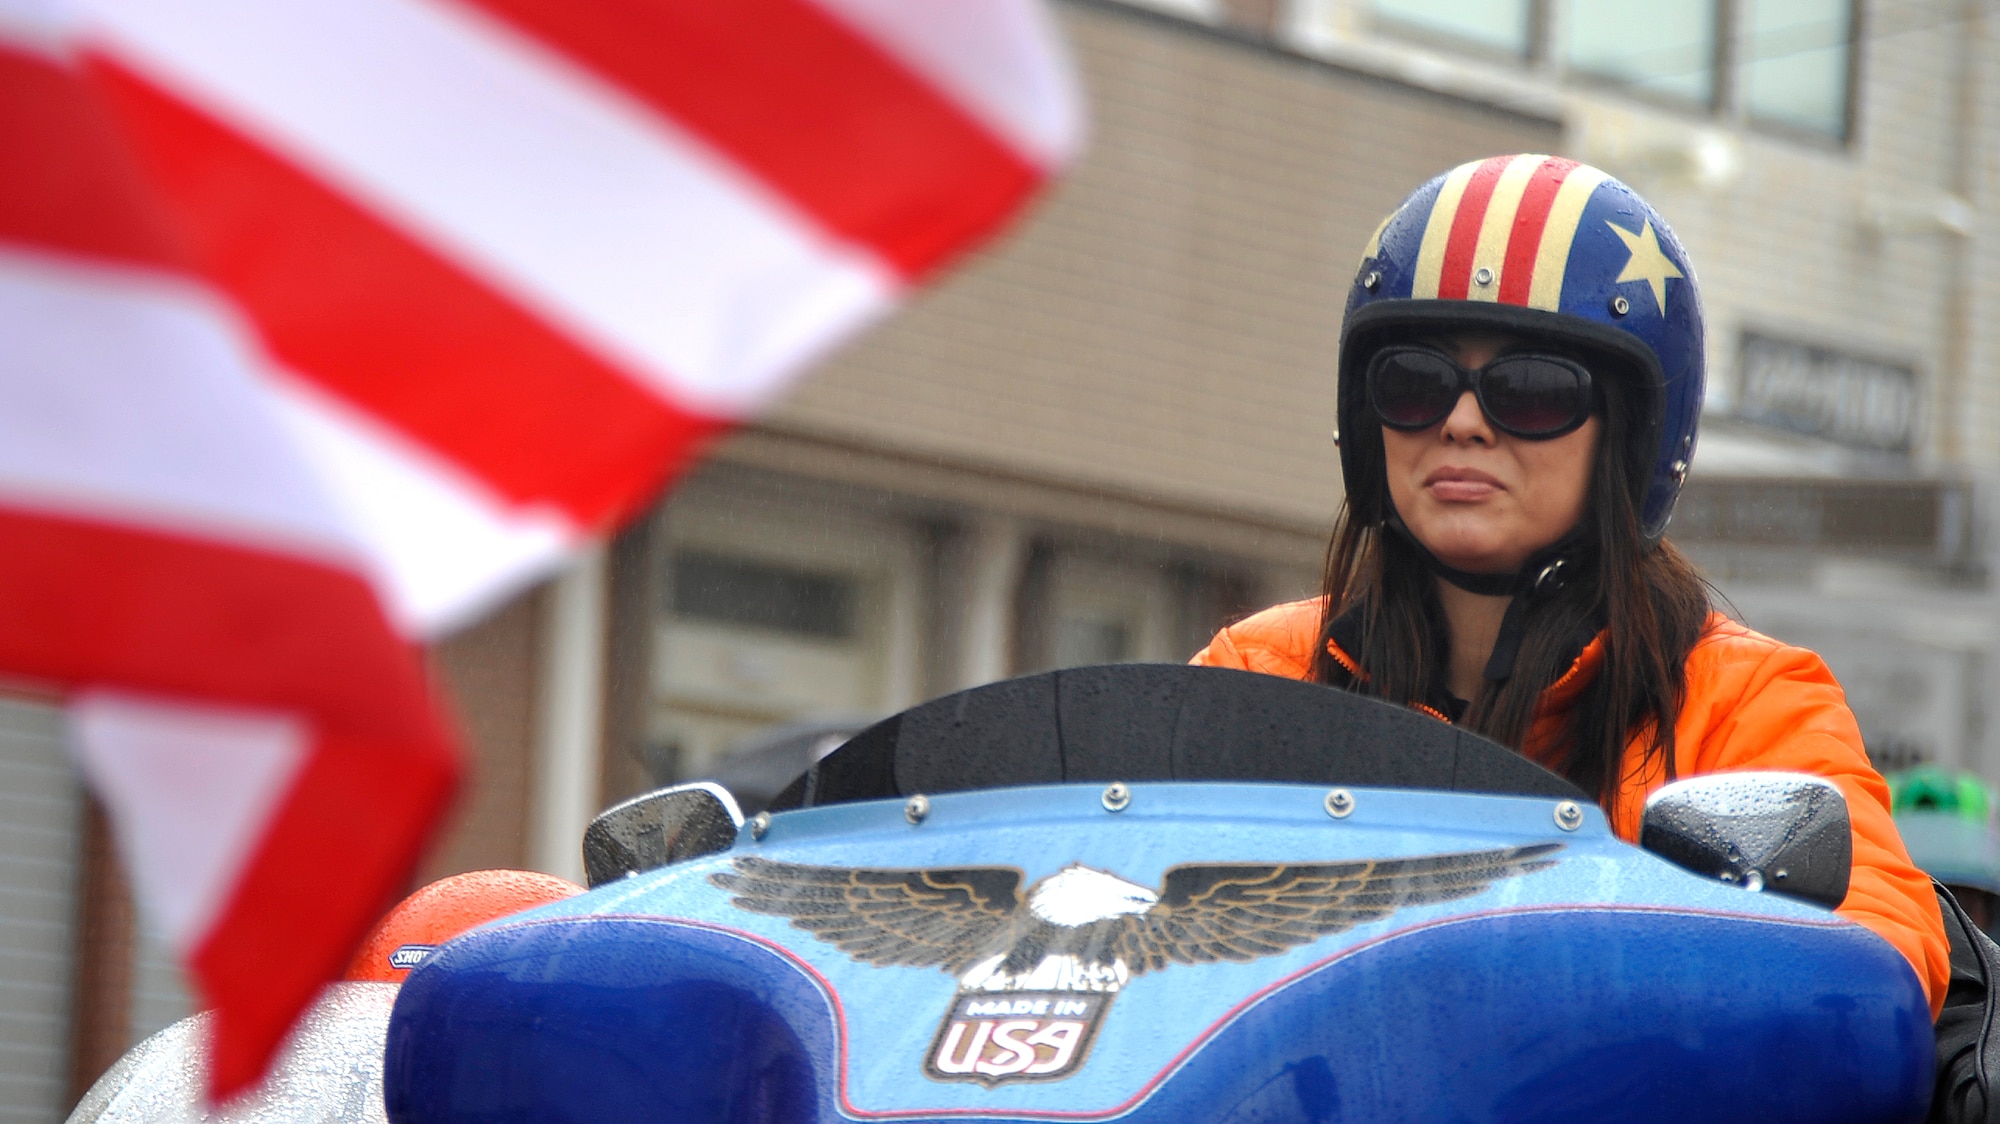 MISAWA AIR BASE, Japan -- A Japanese woman rides her motorcycle during the American Day parade June 7, 2009. The parade consisted of gymnasts, dancers, show cars and various military displays. (U.S. Air Force photo by Senior Airman Chad C. Strohmeyer)